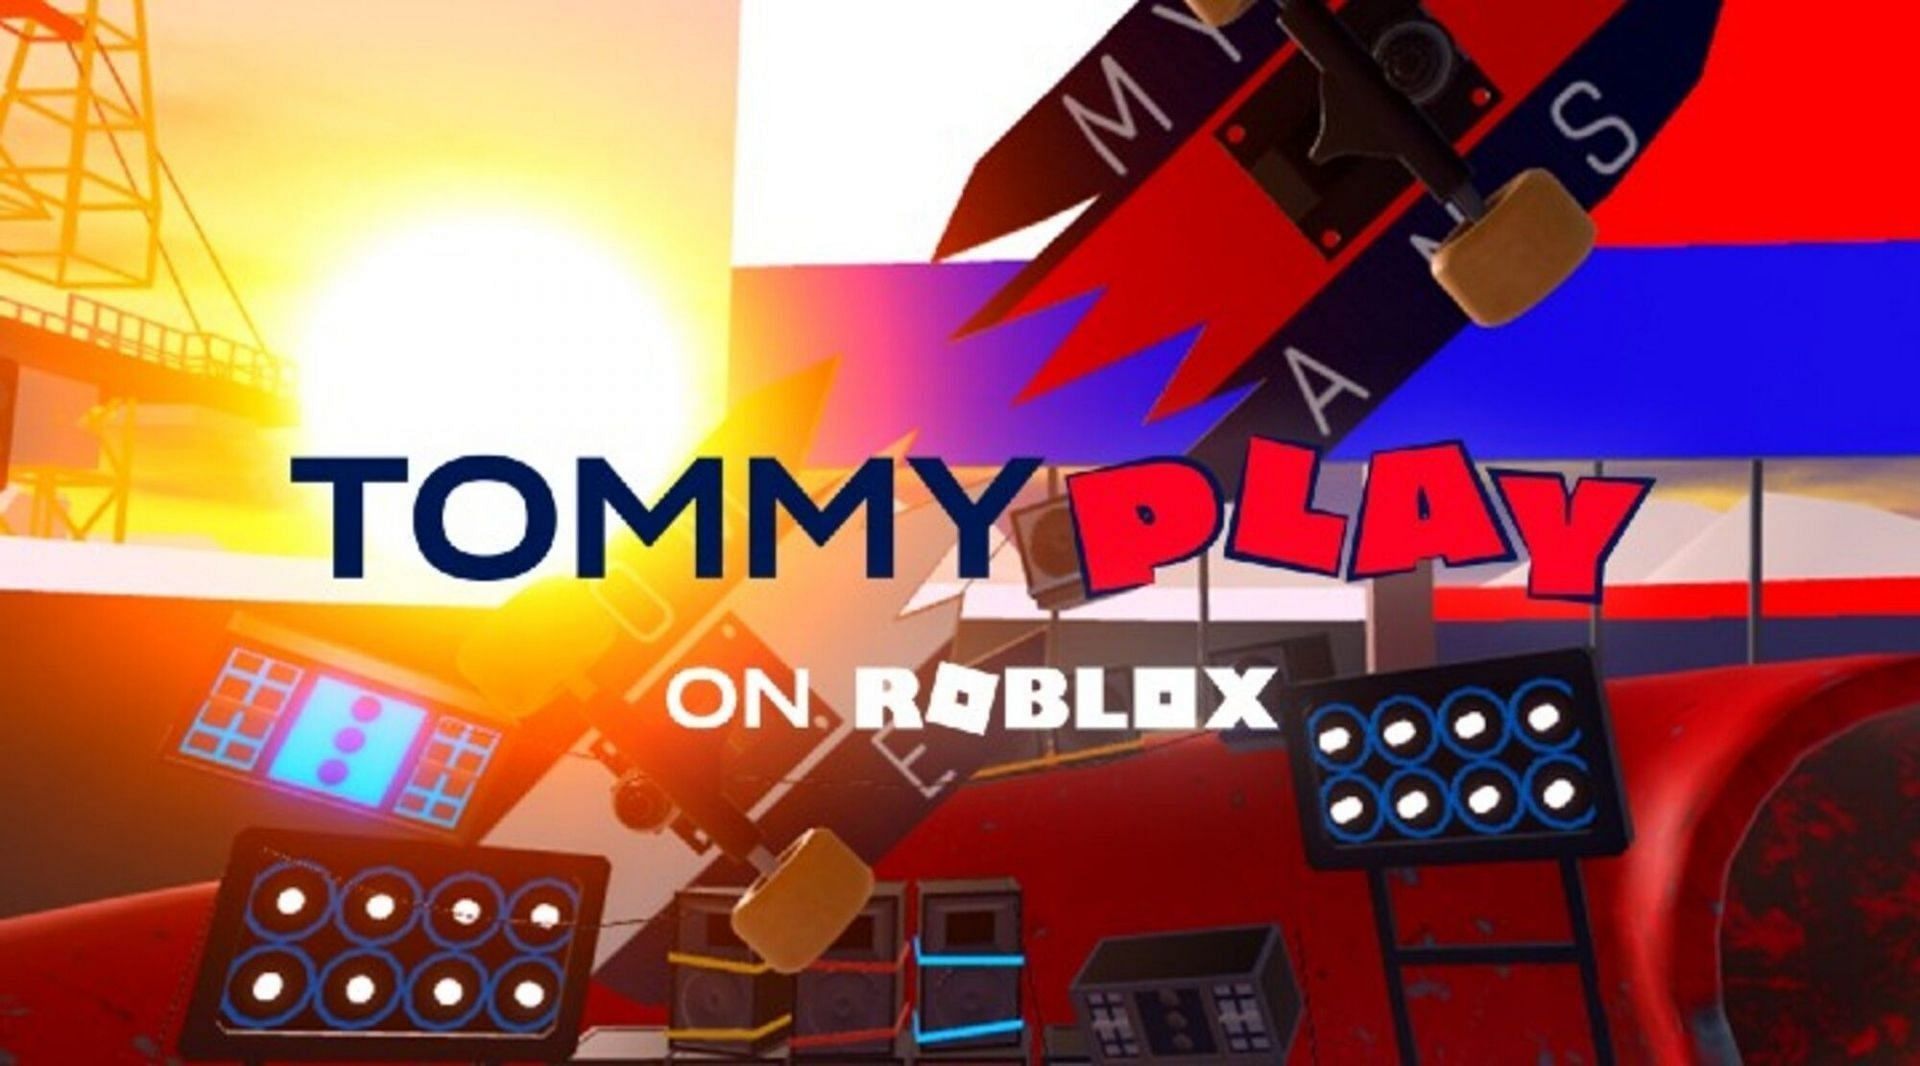 FREE ACCESSORIES! HOW TO GET 13X TOMMY HILFIGER ITEMS! (ROBLOX Tommy Play  Event) 